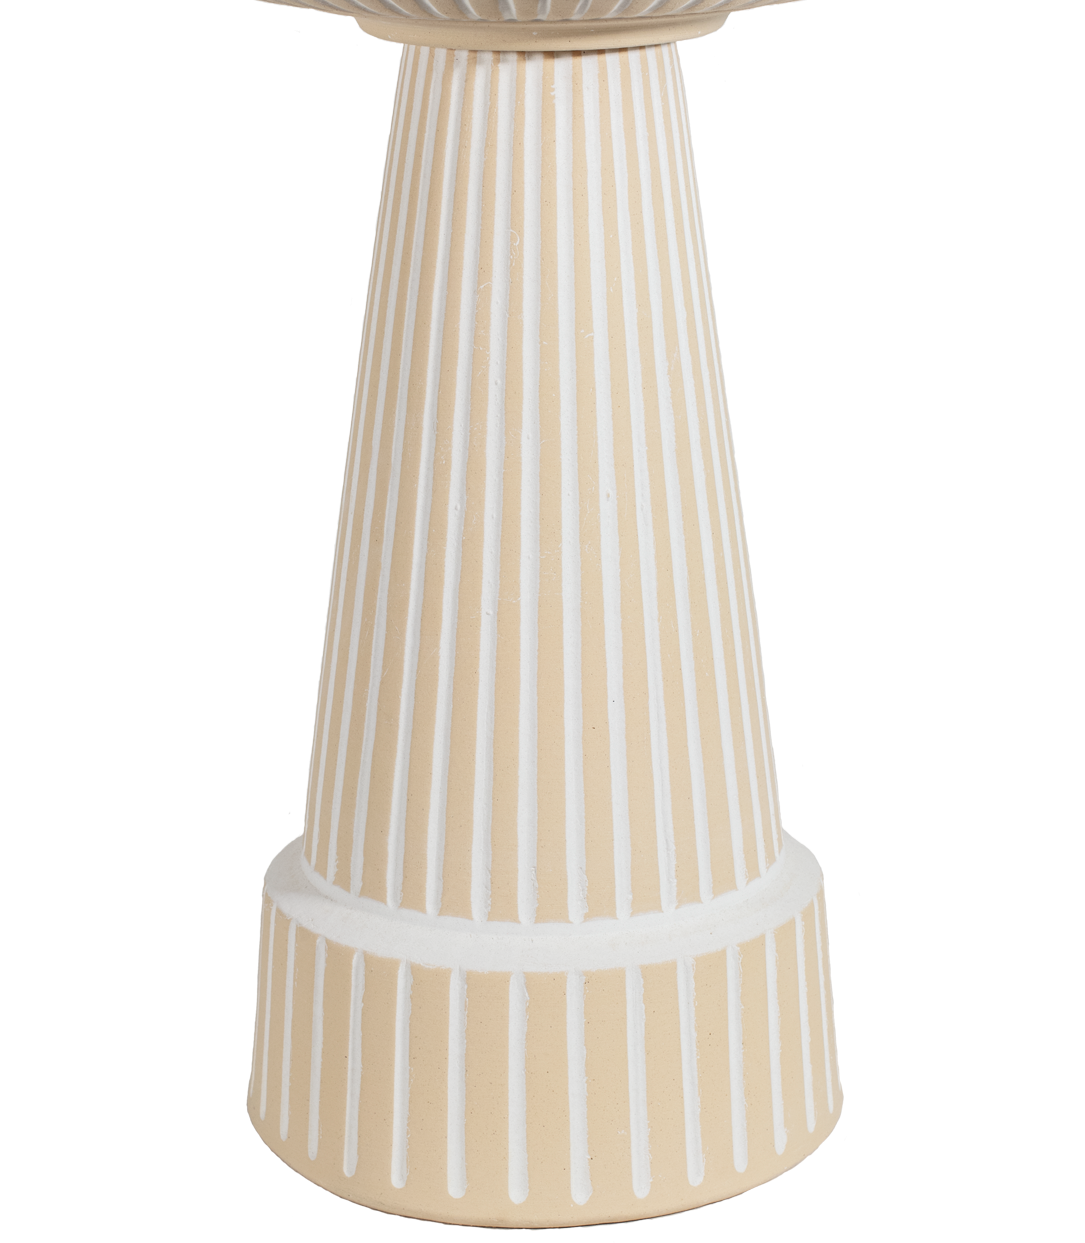 ceramic clay white stained pedestal with vertical stripes